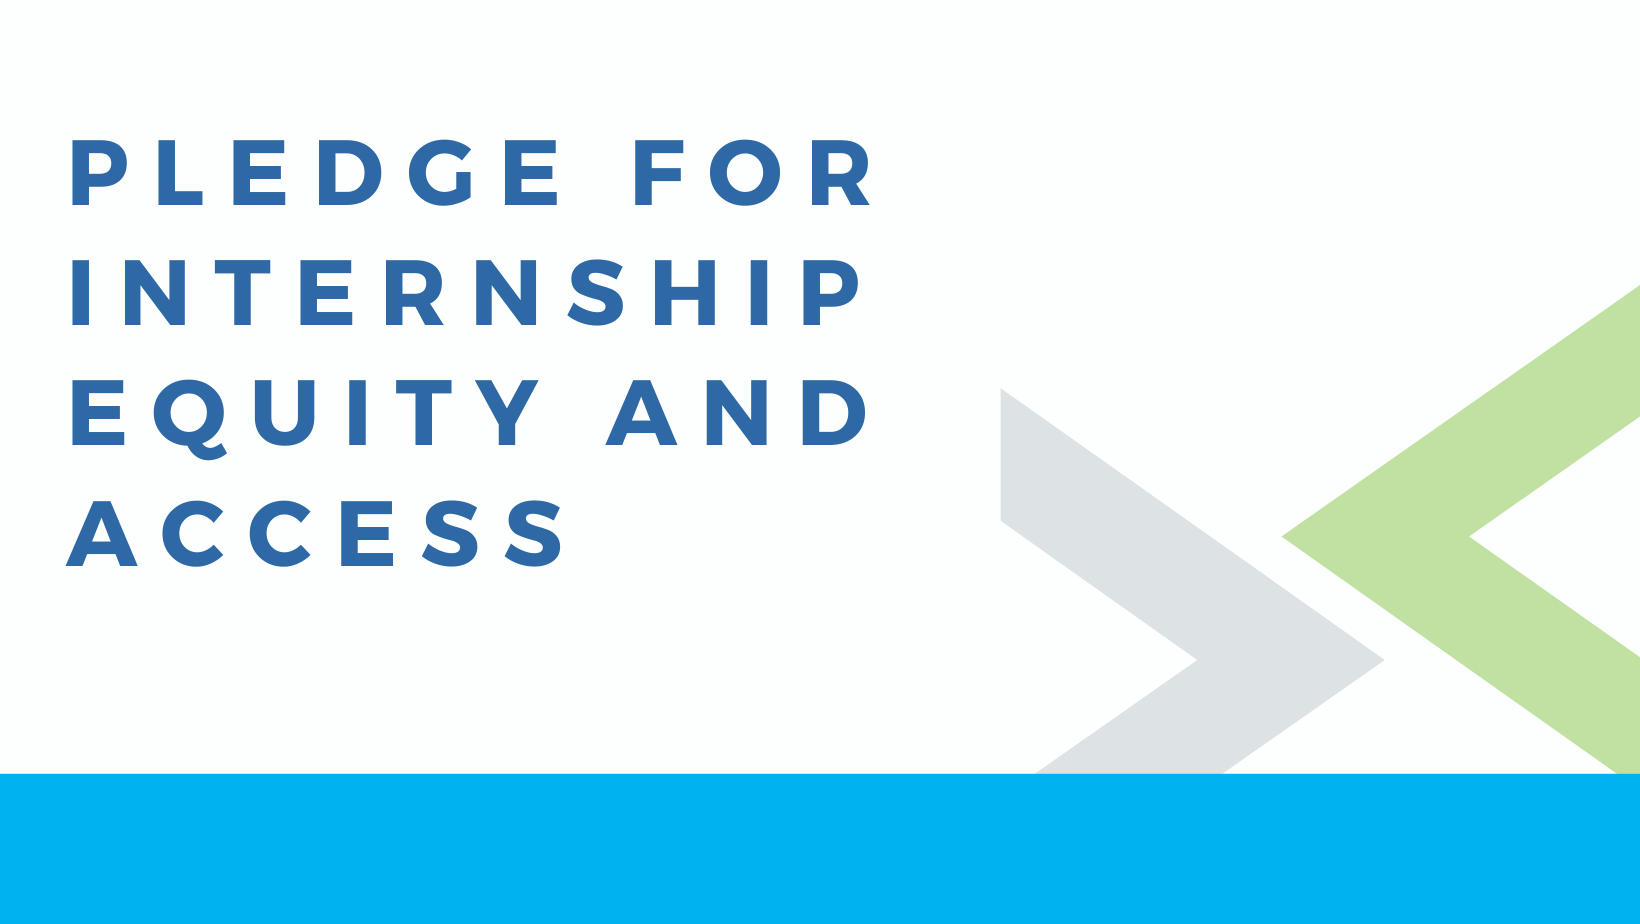 Pledge for Internship Equity and access